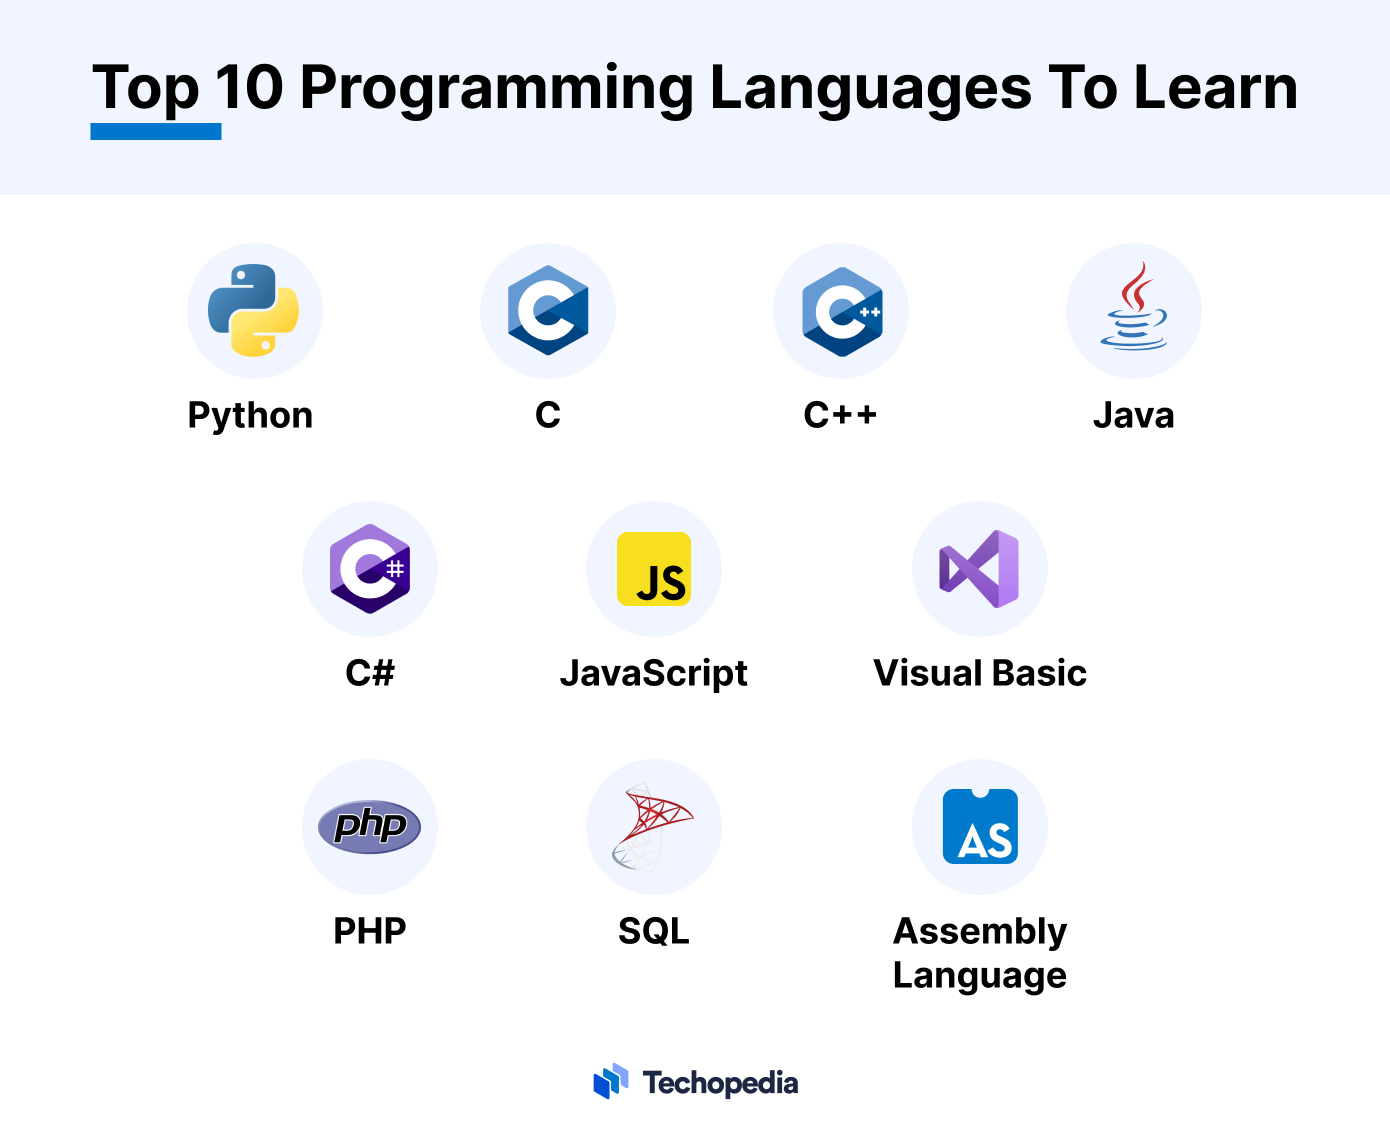 Top 10 Programming Languages To Learn